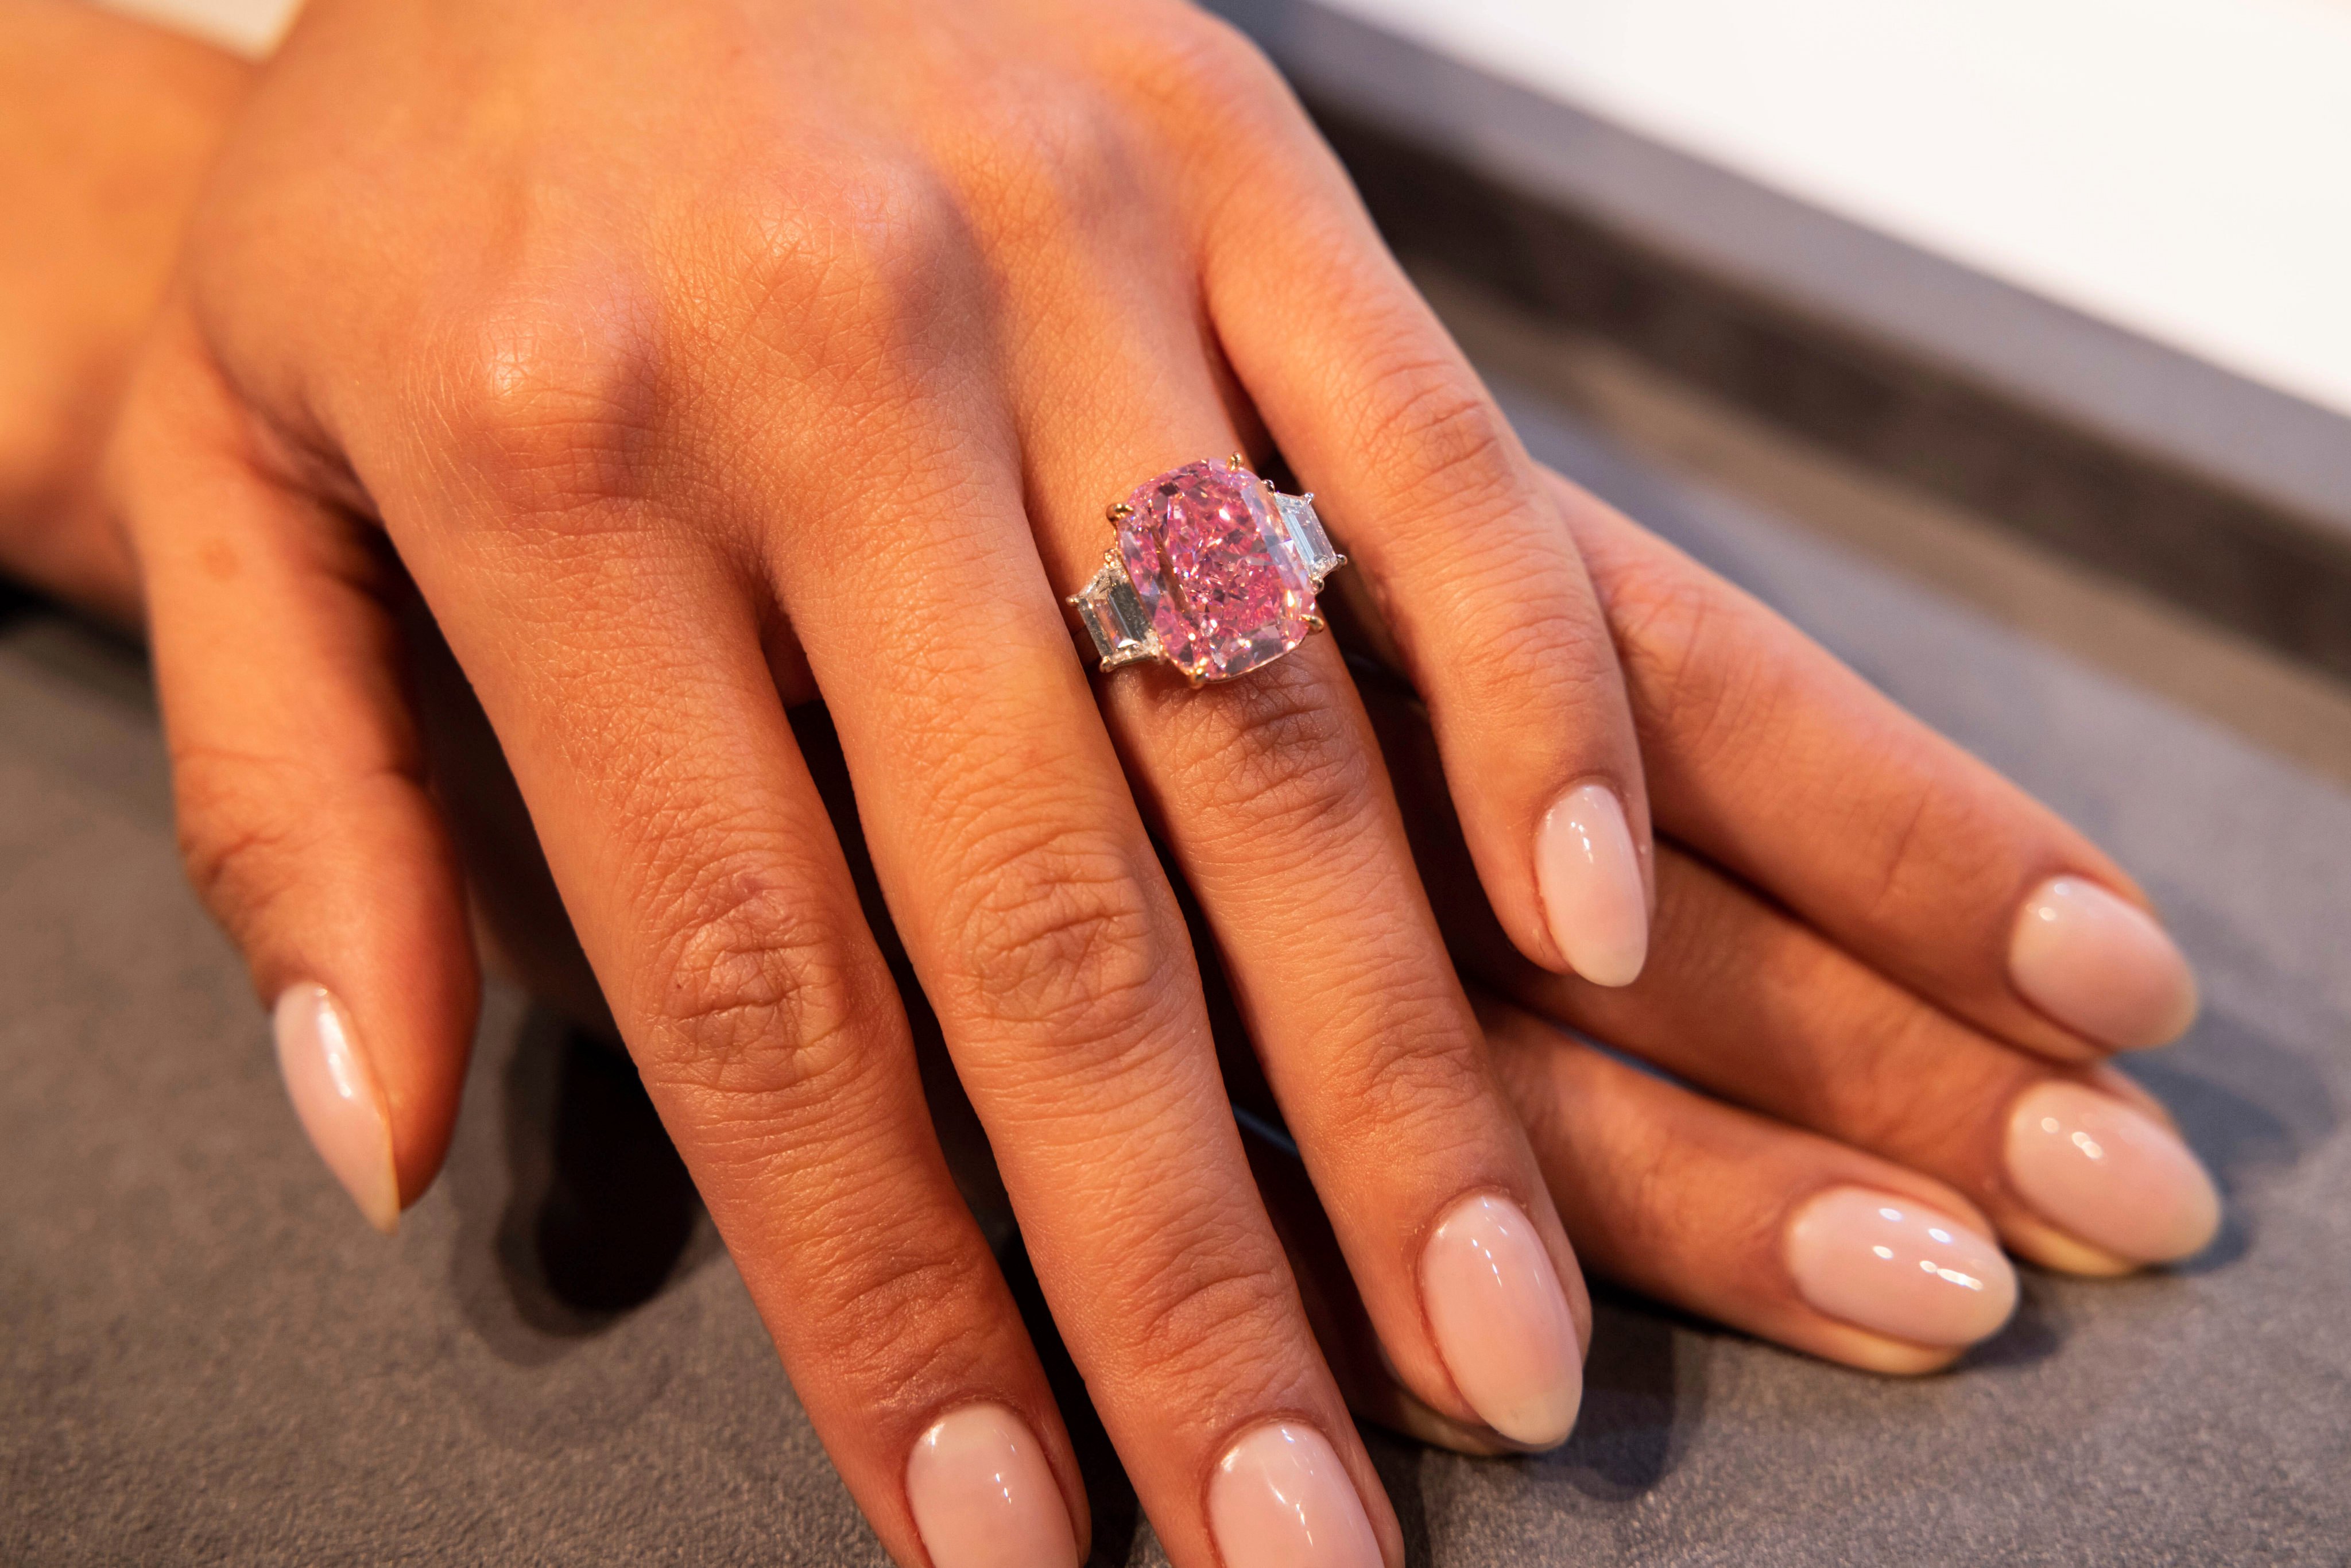 The incredibly rare Eternal Pink diamond is set to go to auction